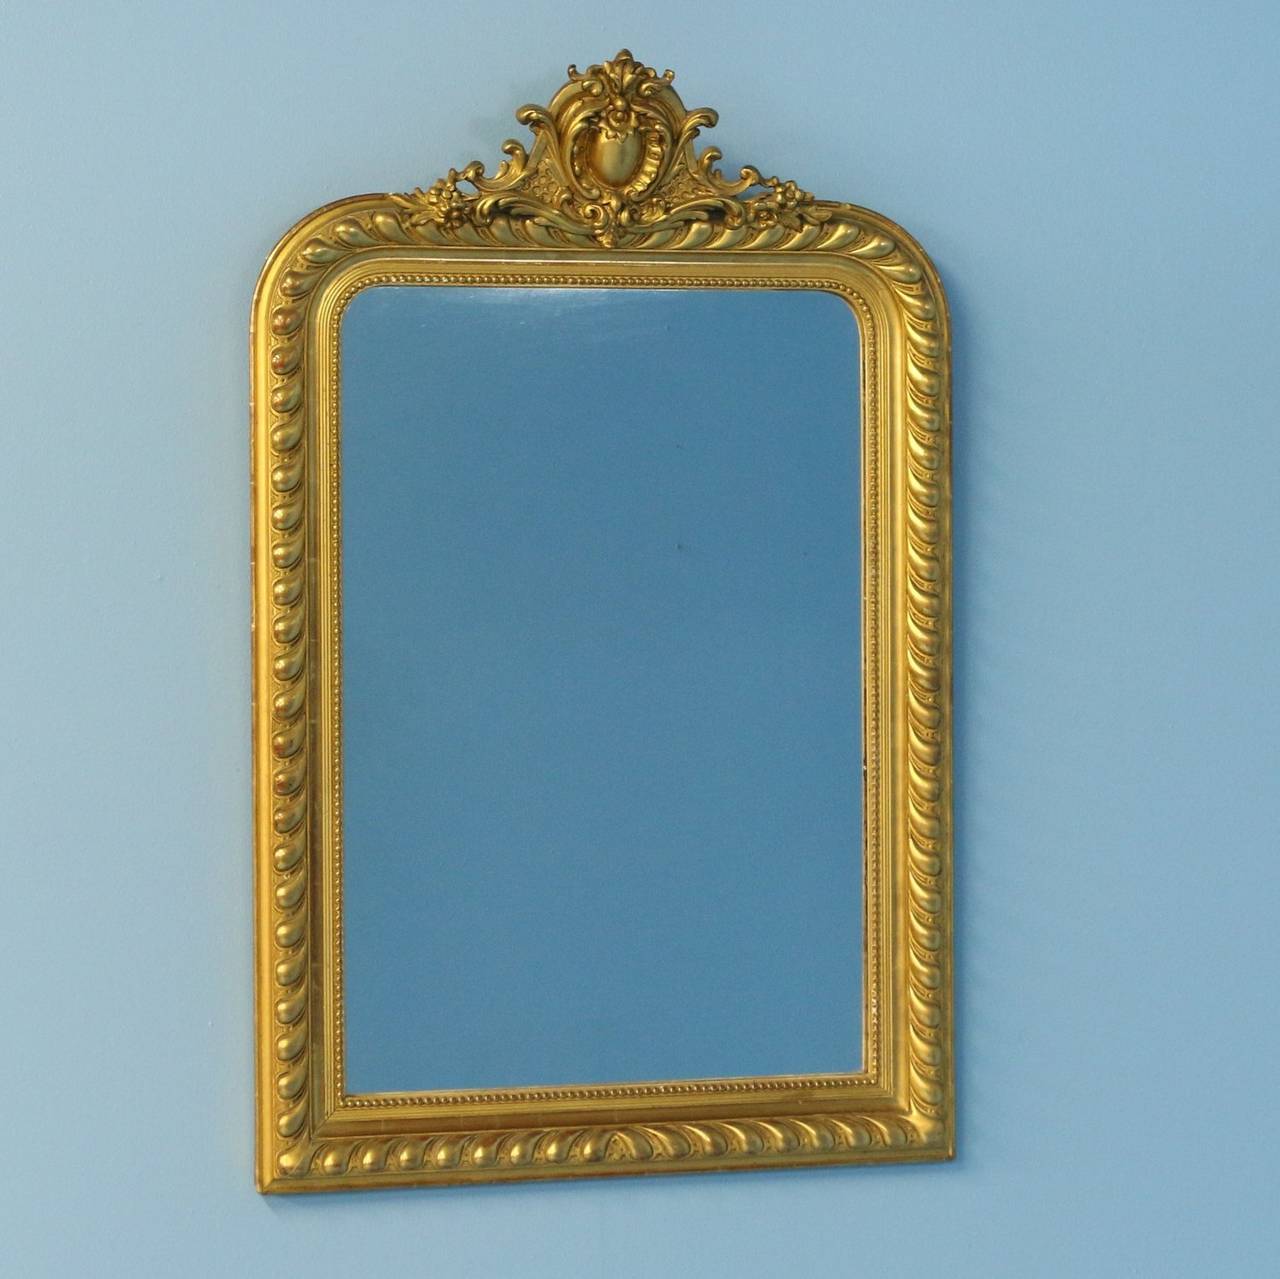 While the ornate crested pediment is elaborate, the overall visual impact is one of refined elegance in this gold gilt mirror from France.